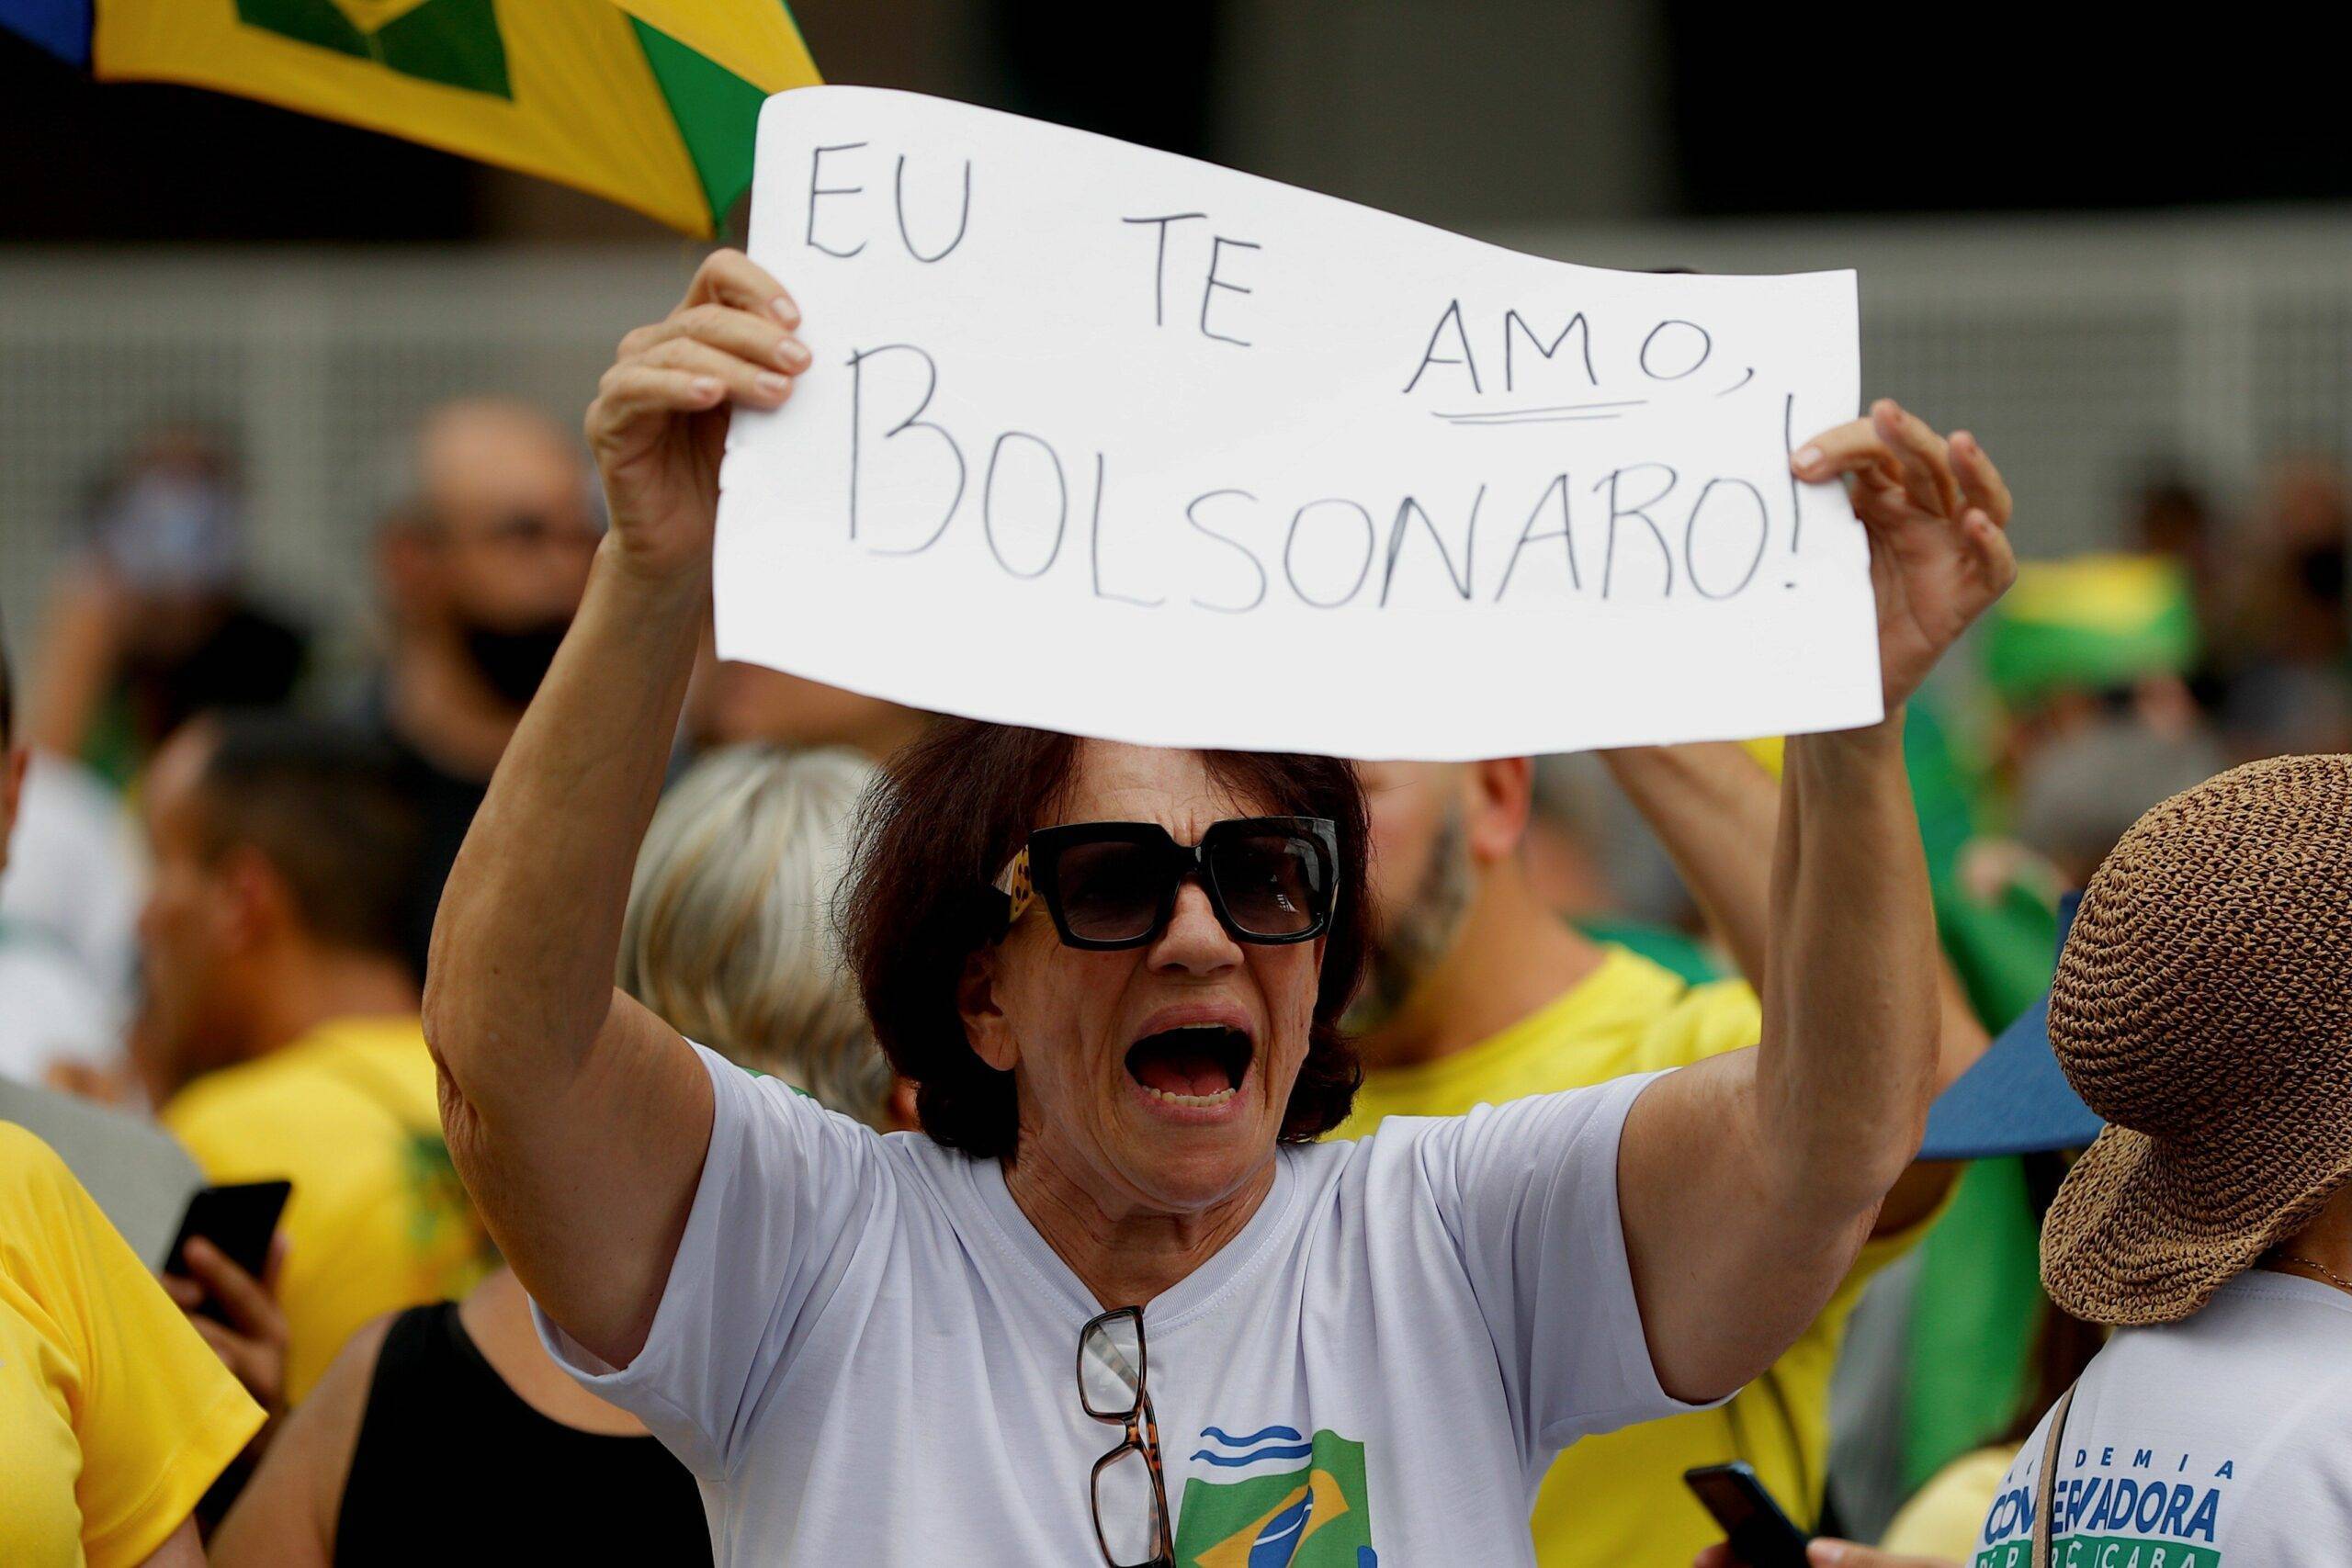 Demonstrators protest against the closure of businesses due to the pandemic in Sao Paulo, Brazil 14 MArch 2021. Followers of the Brazilian president, Jair Bolsonaro, protested this Sunday in the main cities of the country, such as Sao Paulo, Rio de Janeiro, Brasilia and Belo Horizonte, against the restrictive measures imposed by regional governments to stop the COVID pandemic. EFE/Fernando Bizerra Jr//EFE_20210314-637513560142231313/2103142236/Credit:Fernando Bizerra Jr/EFE/SIPA/2103142239